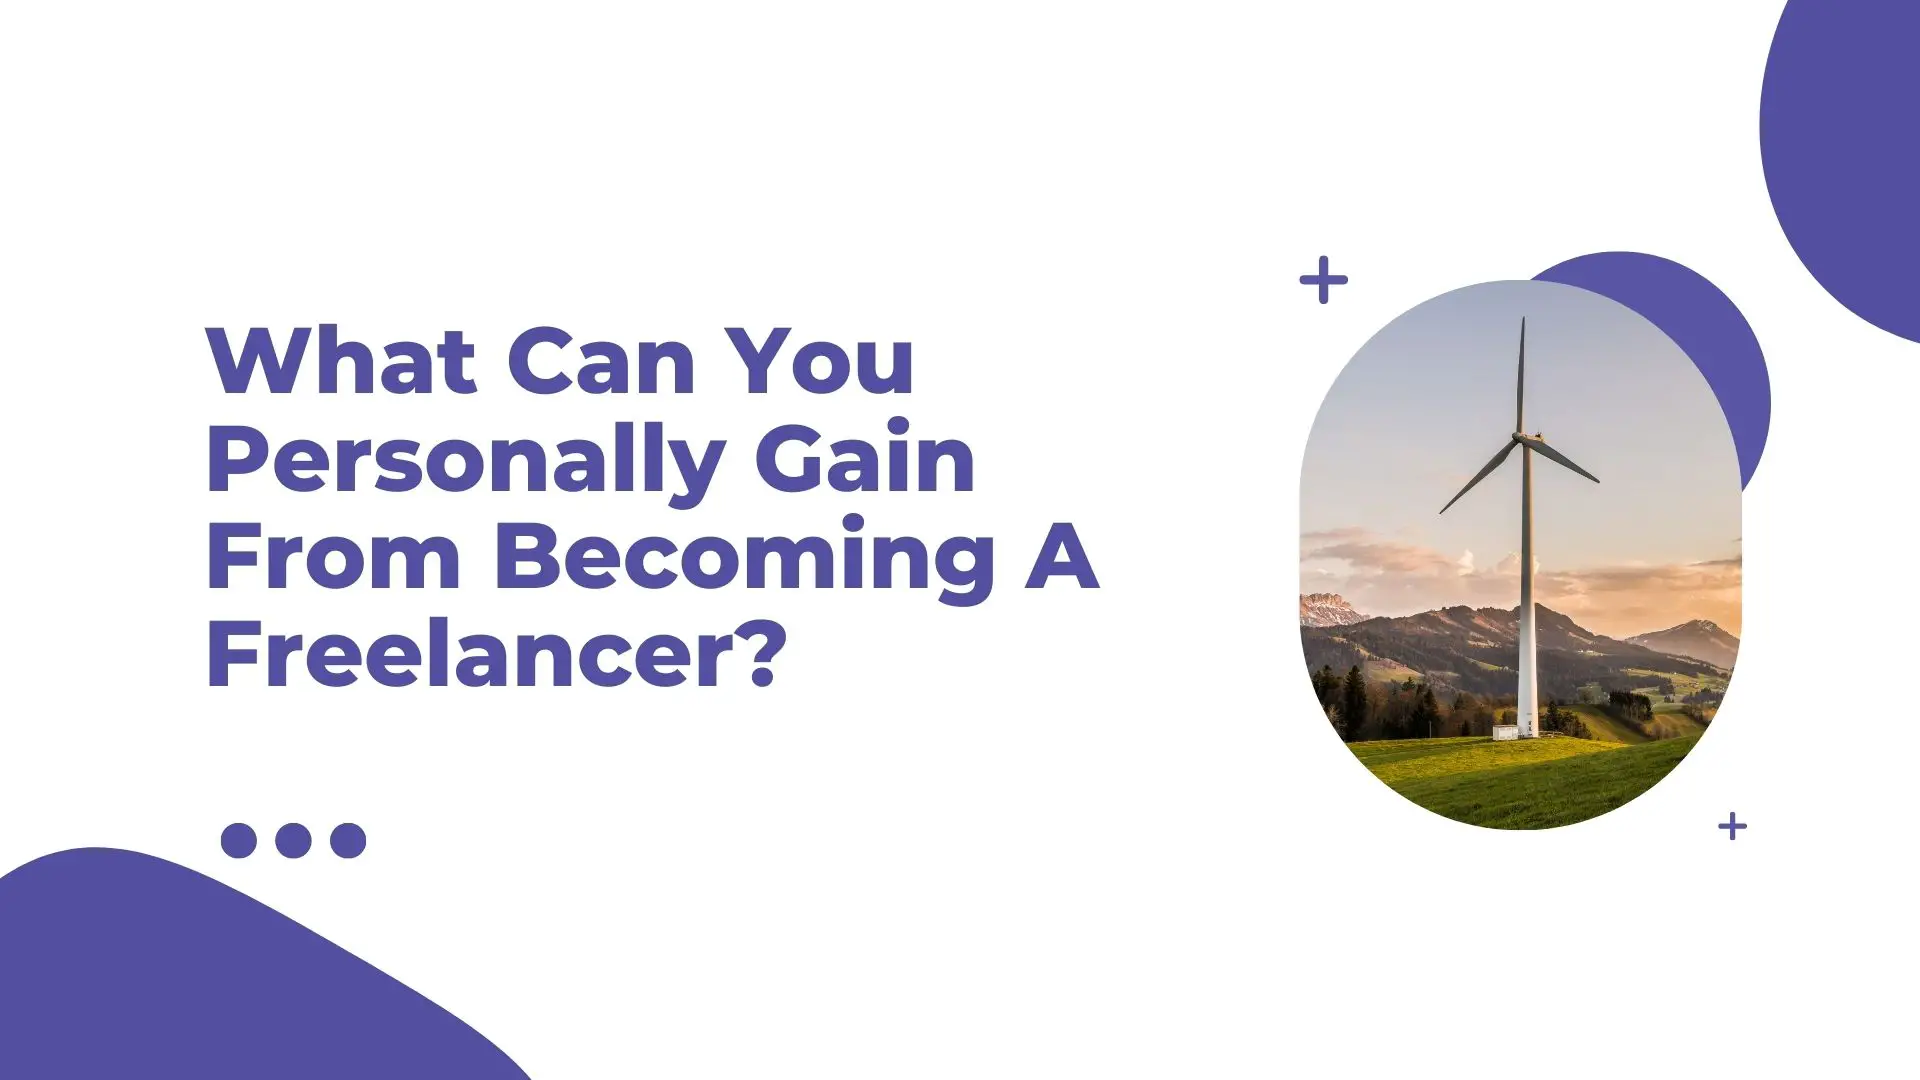 What Can You Personally Gain From Becoming A Freelancer?